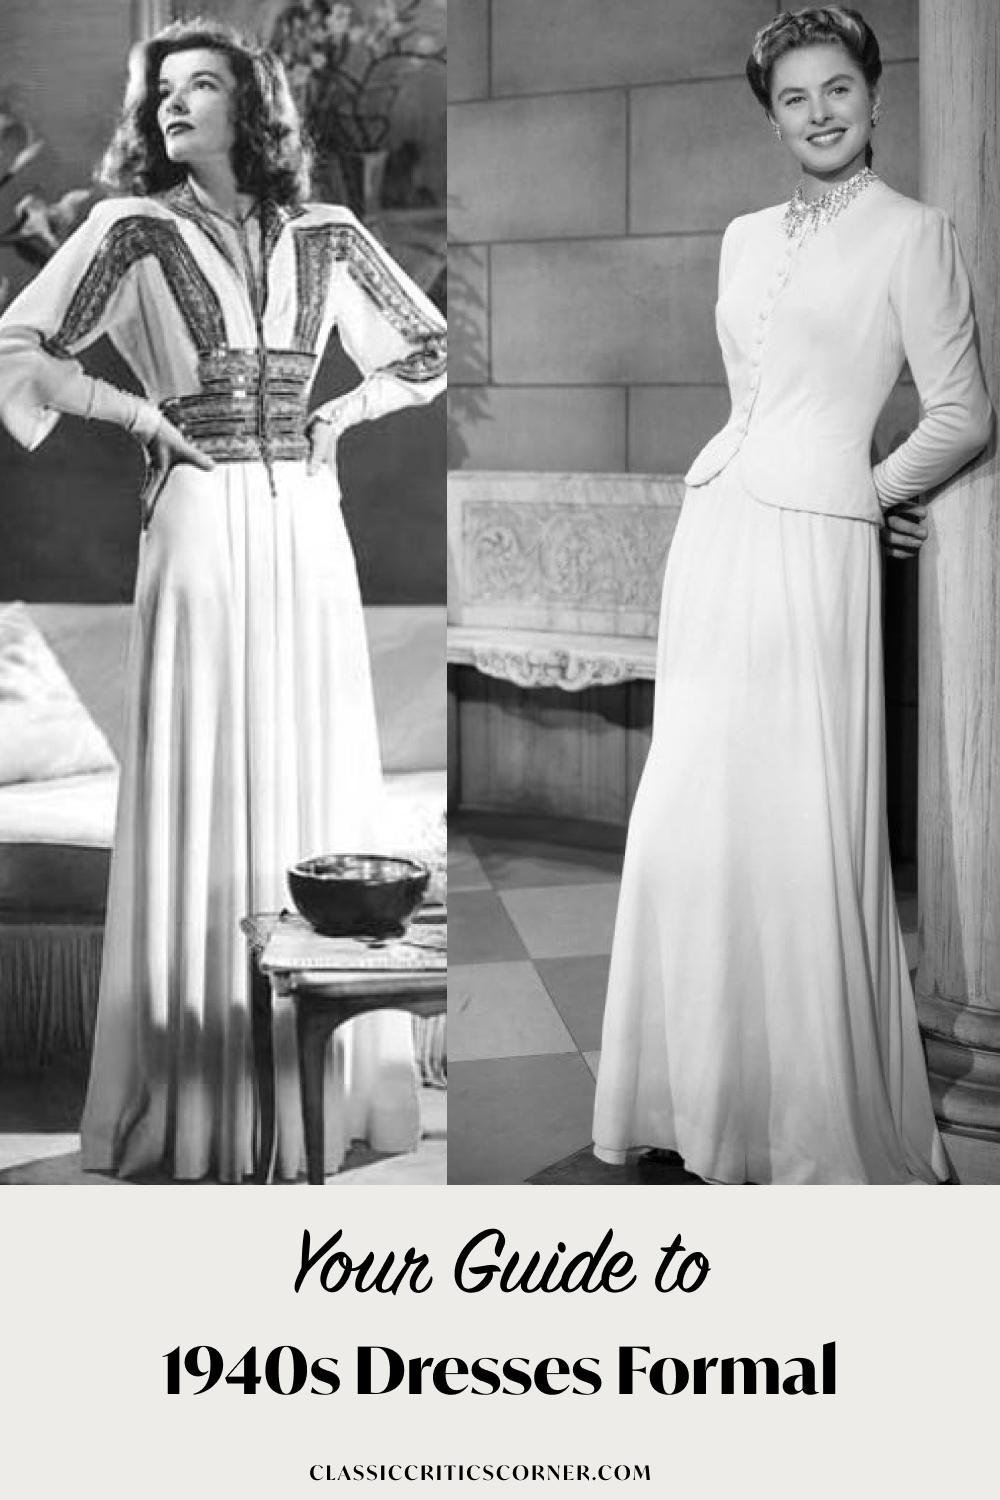 Your Guide to 1940s Dresses Formal — Classic Critics Corner - Vintage  Fashion Inspiration including 1940s Fashion, 1950s Fashion and Old  Hollywood Glam icons like Grace Kelly, Audrey Hepburn and Marilyn Monroe.